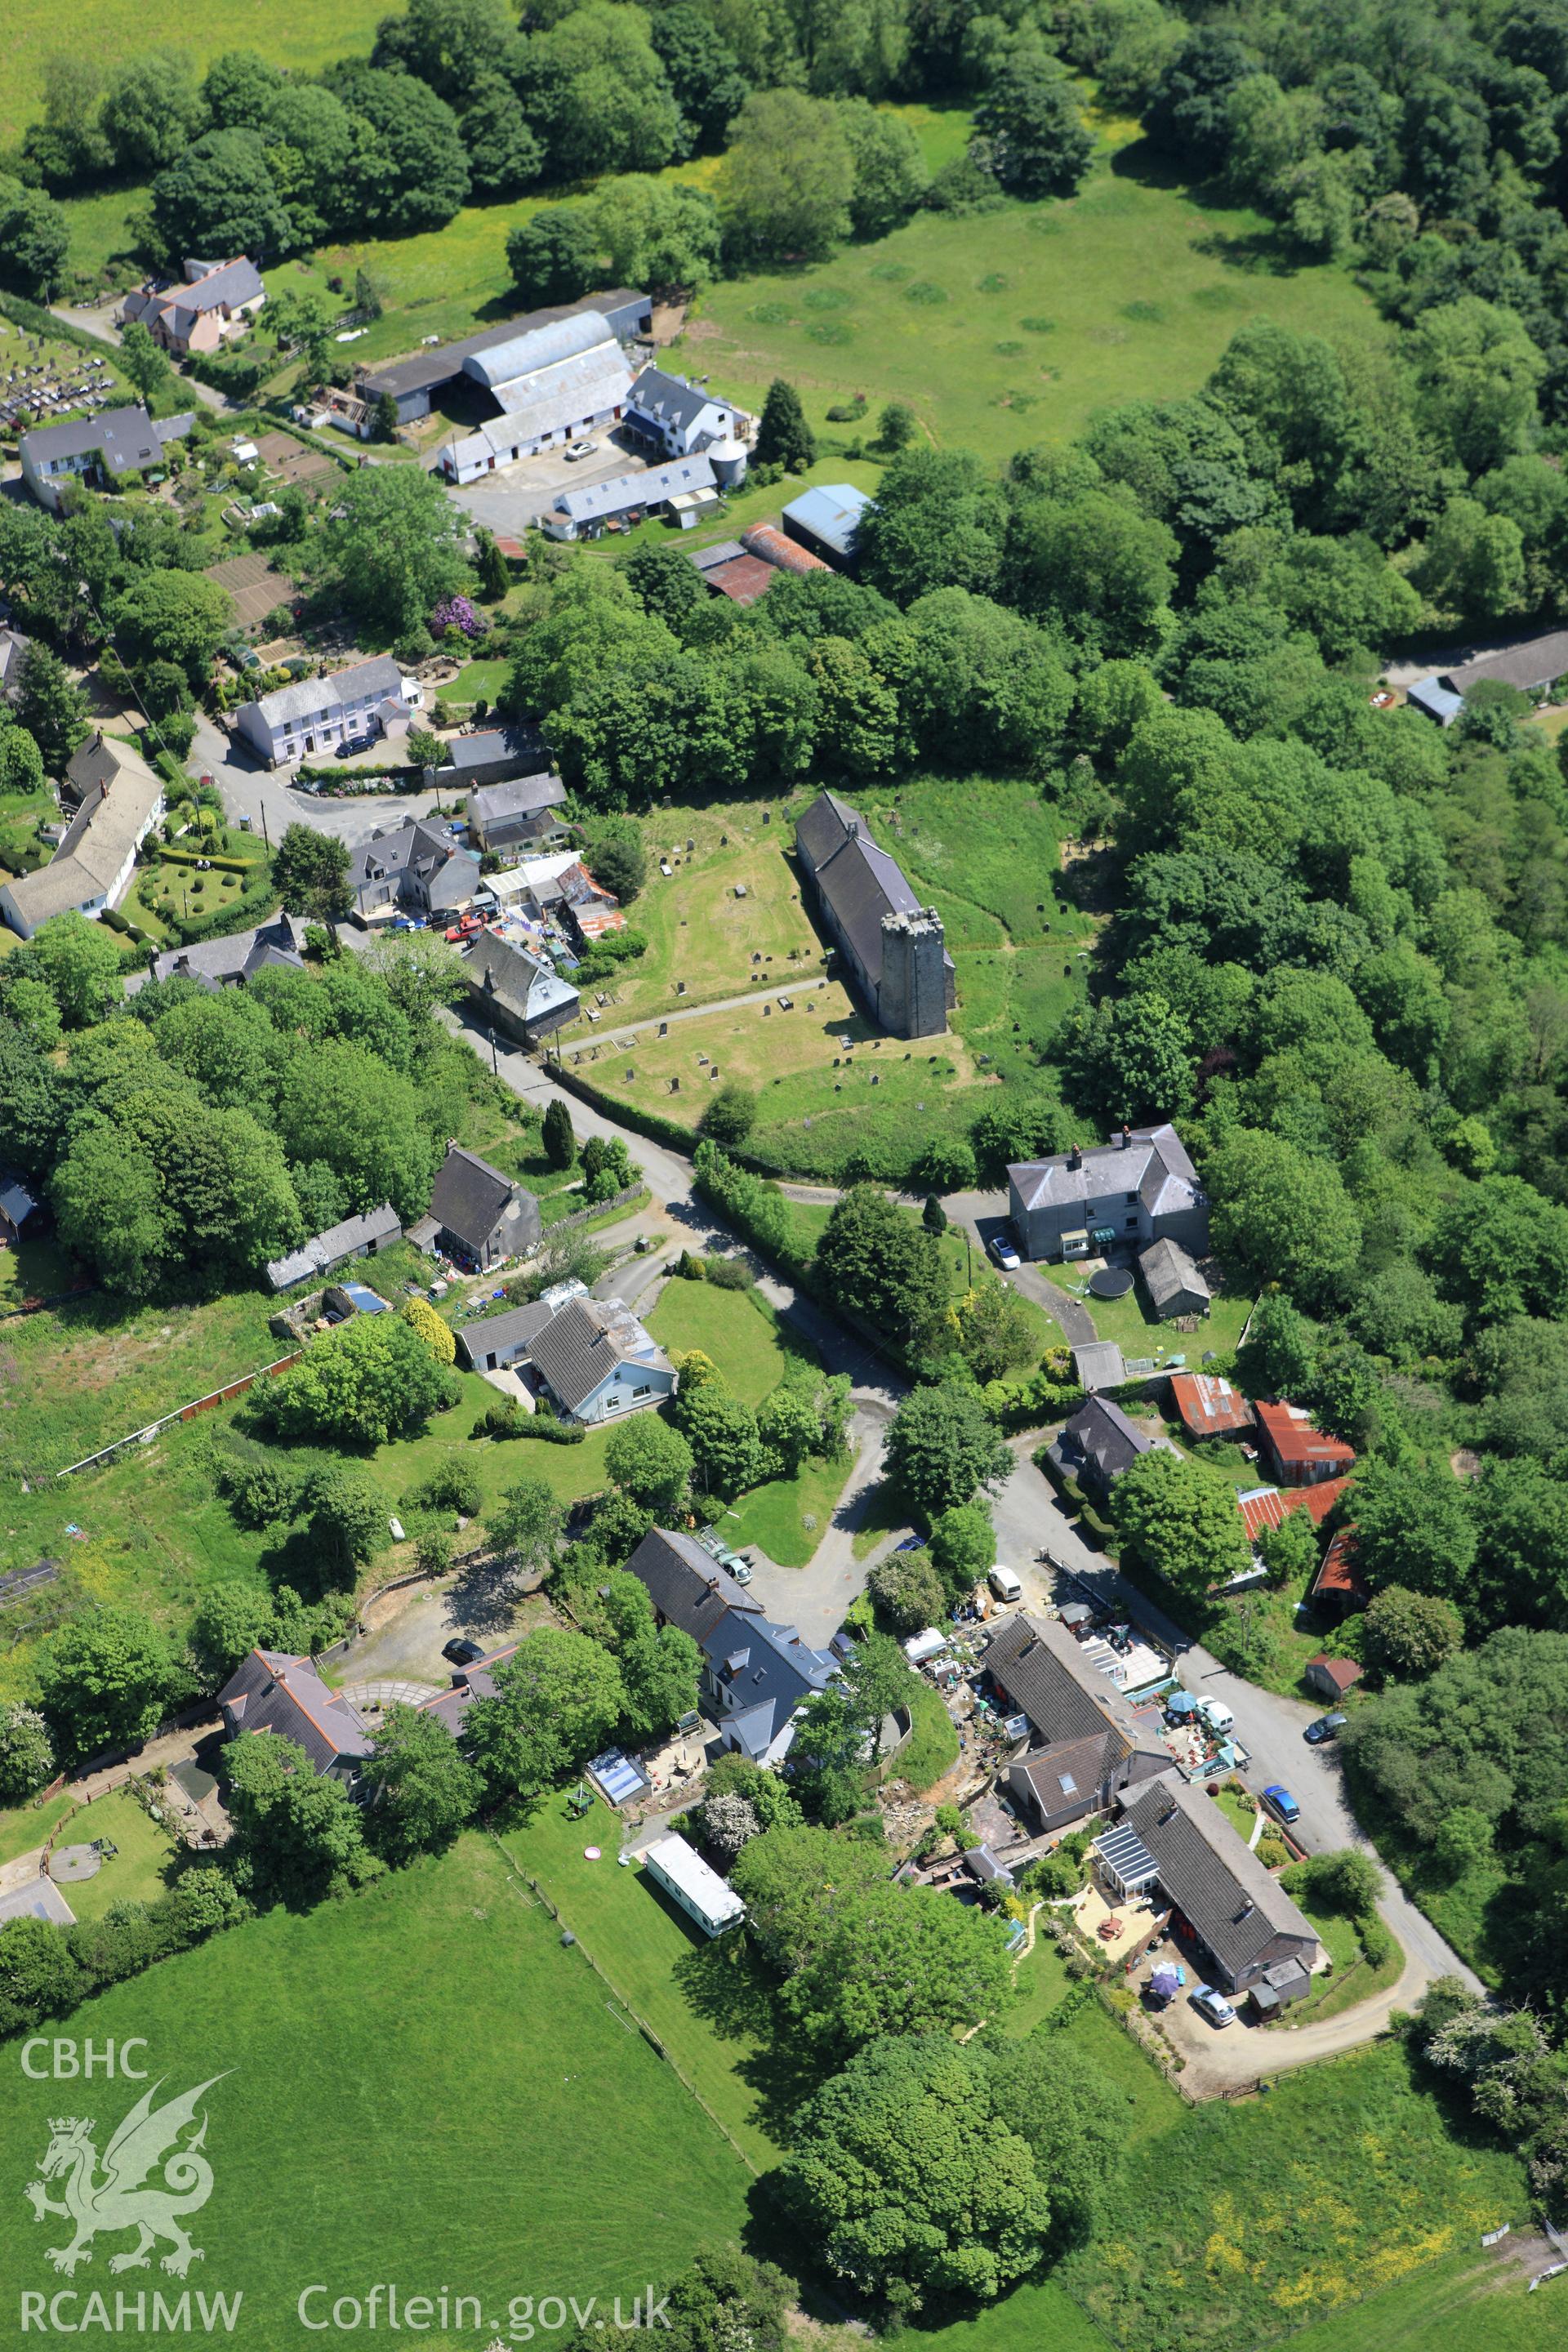 RCAHMW colour oblique aerial photograph of St Ismael's Church, Camrose. Taken on 01 June 2009 by Toby Driver